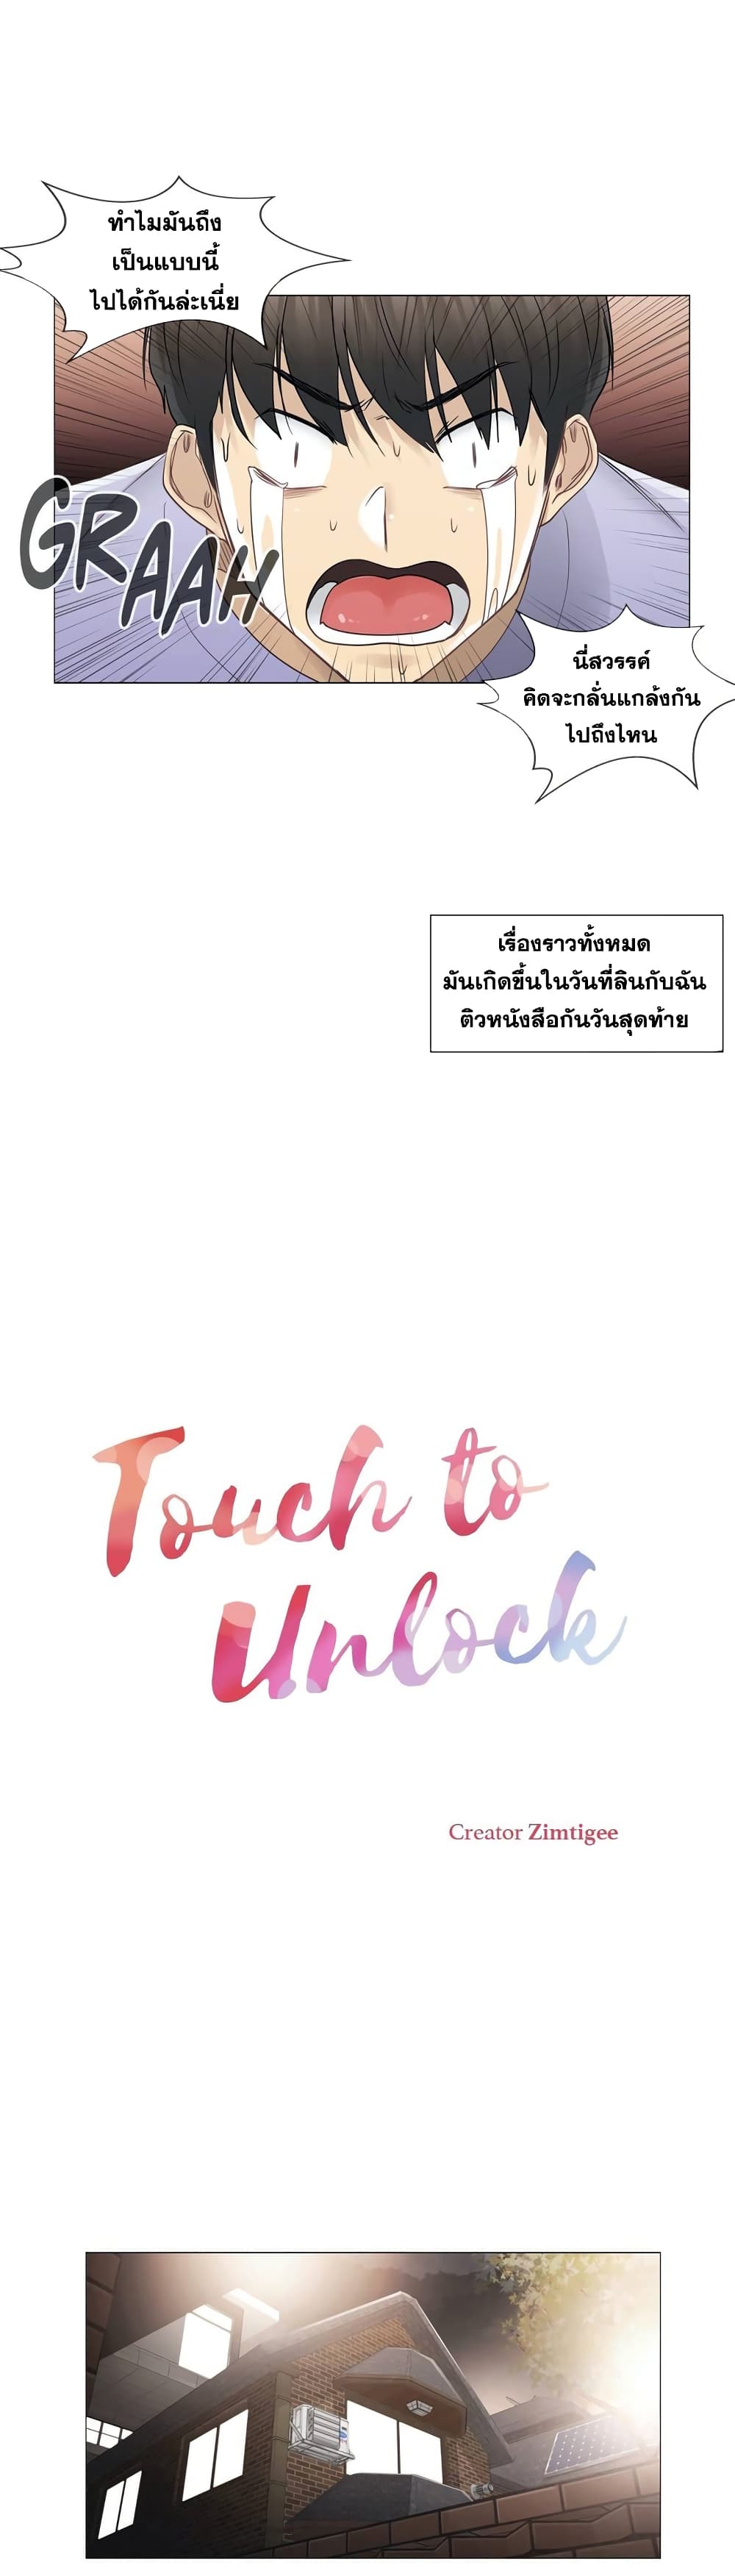 Touch To Unlock45 (7)